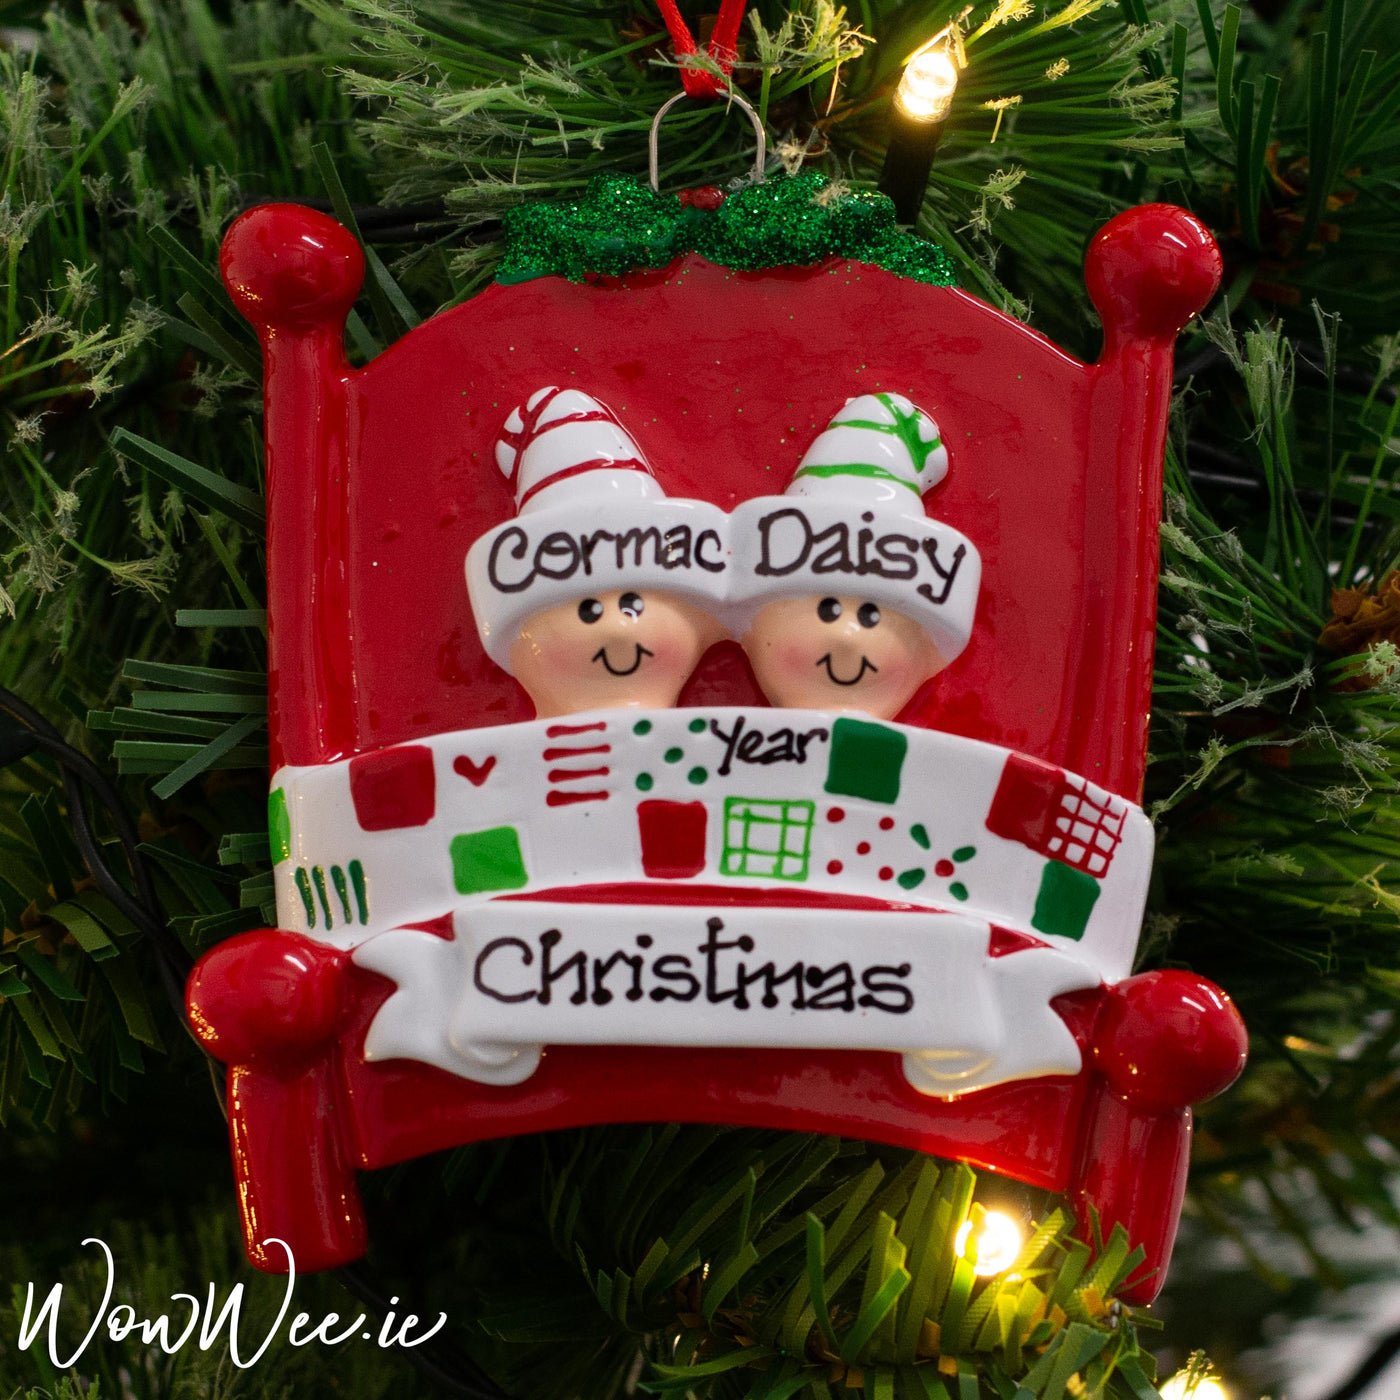 Personalised Christmas Ornaments Ireland | Personalised Christmas Ornament for Couples | Personalised Christmas Ornaments for 2 People | Personalised Christmas Tree Decorations For Couples | WowWee.ie